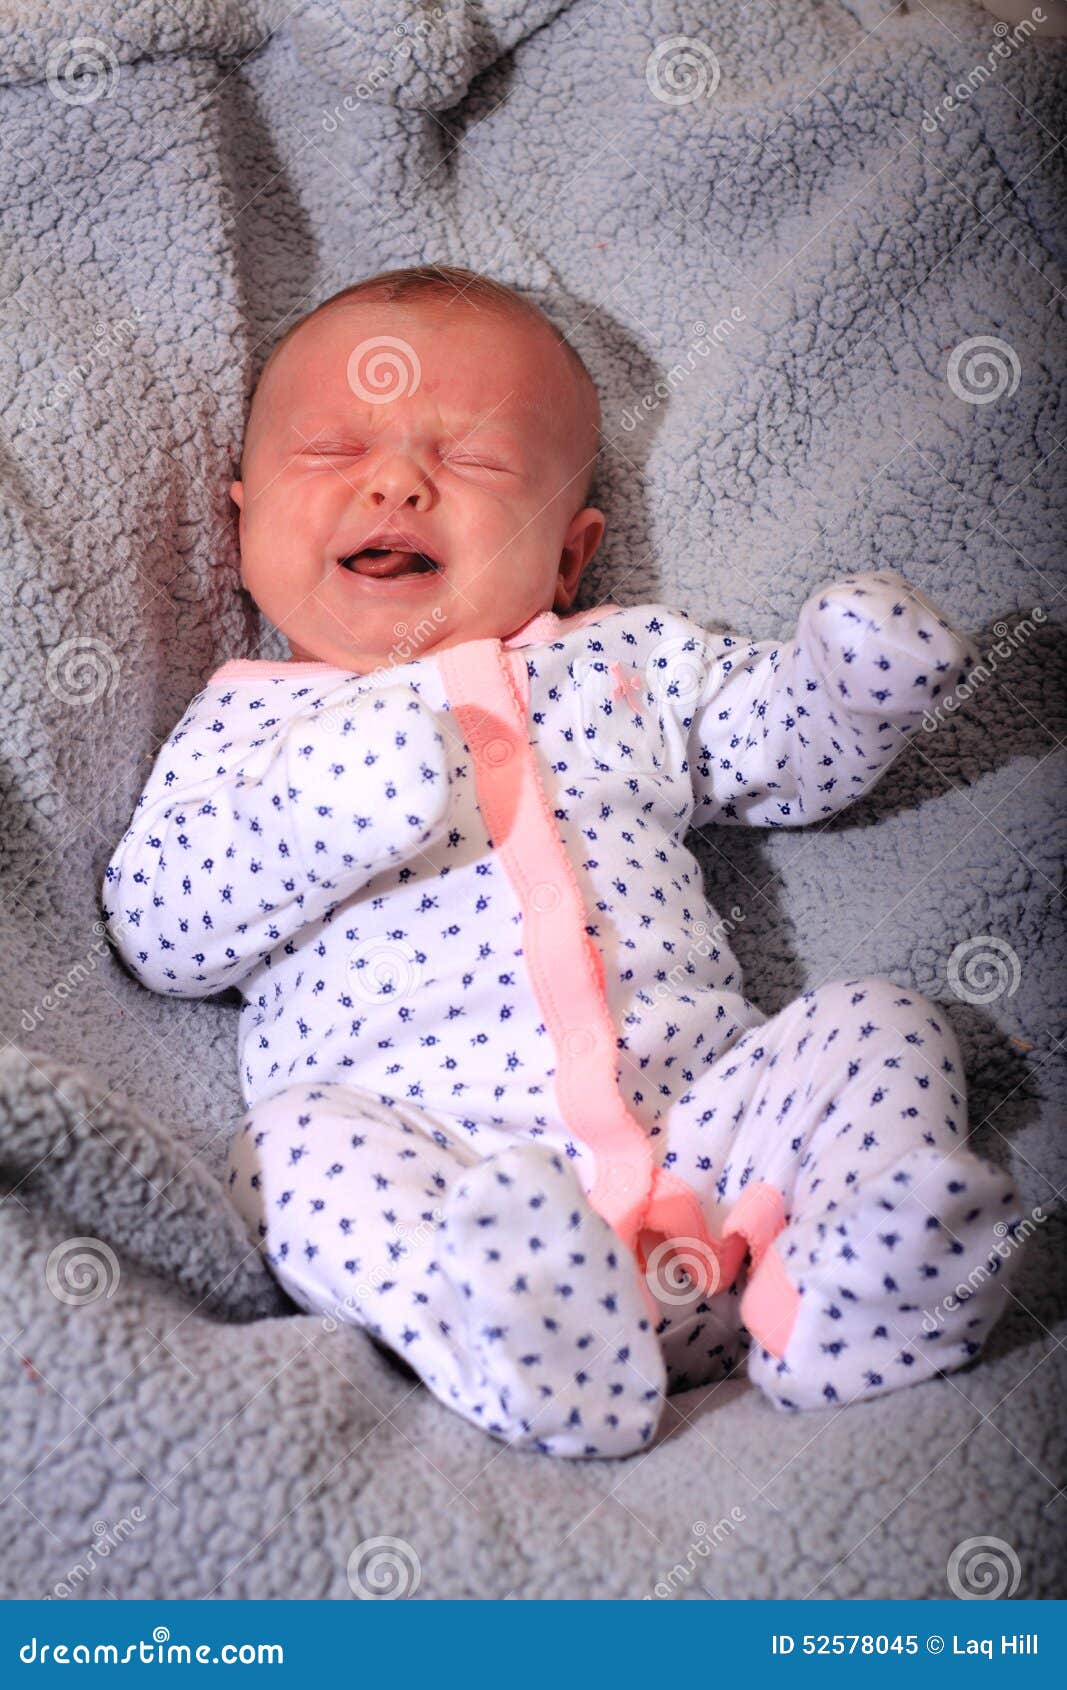 Unhappy Crying New Baby stock image. Image of blanket - 52578045